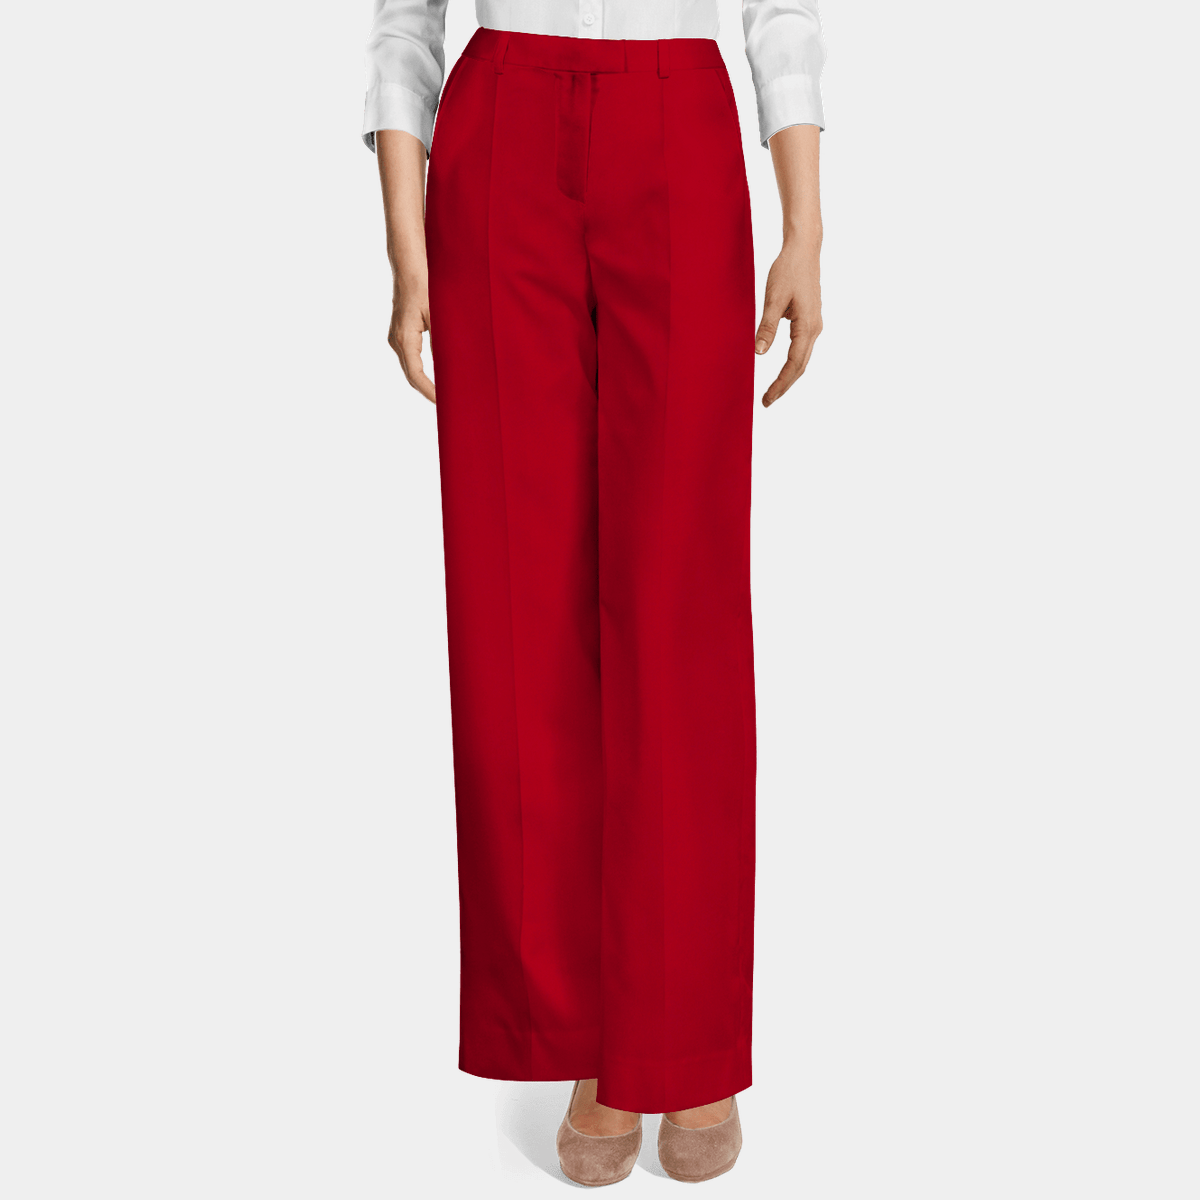 Aamayra Fashion House Red Woolen Pant For Women - Buy Aamayra Fashion House  Red Woolen Pant For Women at Best Price in SYBazzar